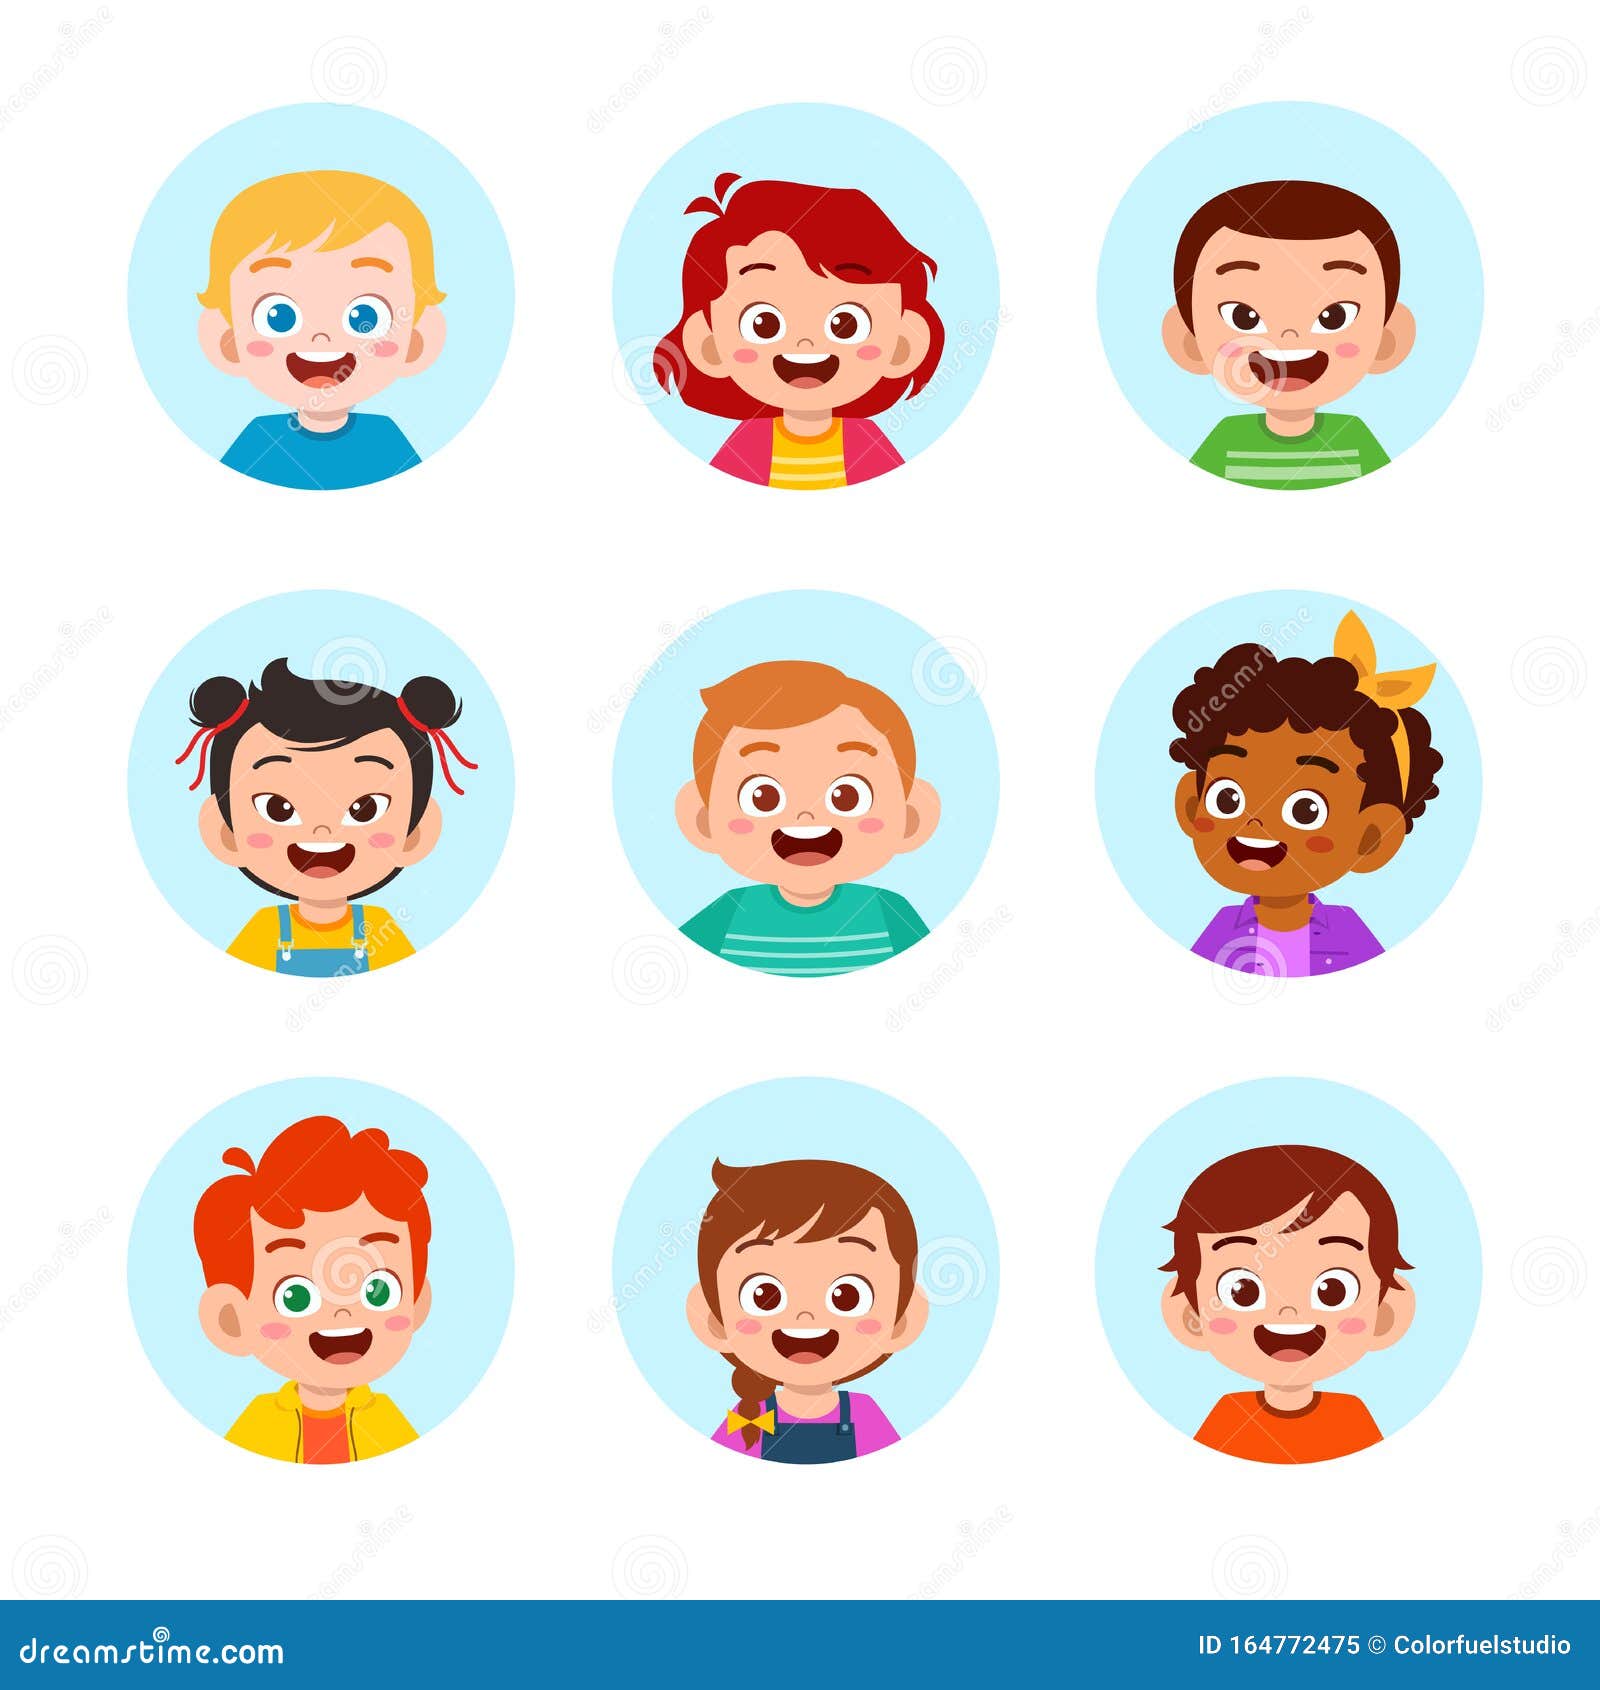 Kids Avatar Vector Art Icons and Graphics for Free Download